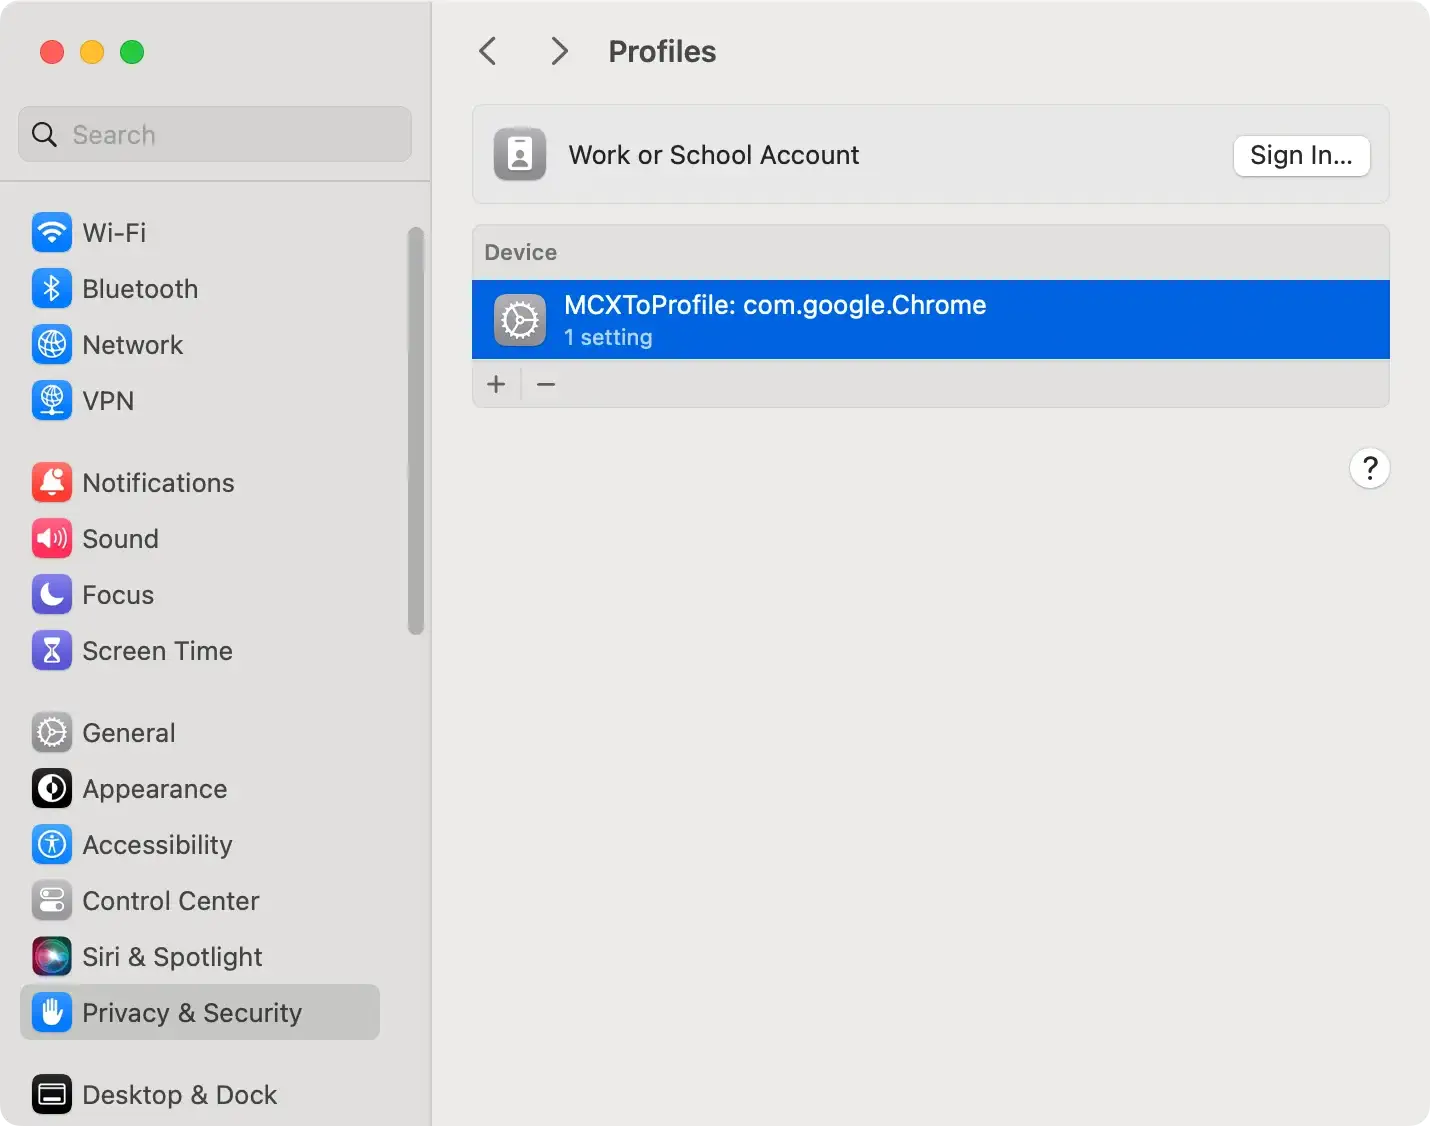 screenshot of the general configuration profile settings on macos